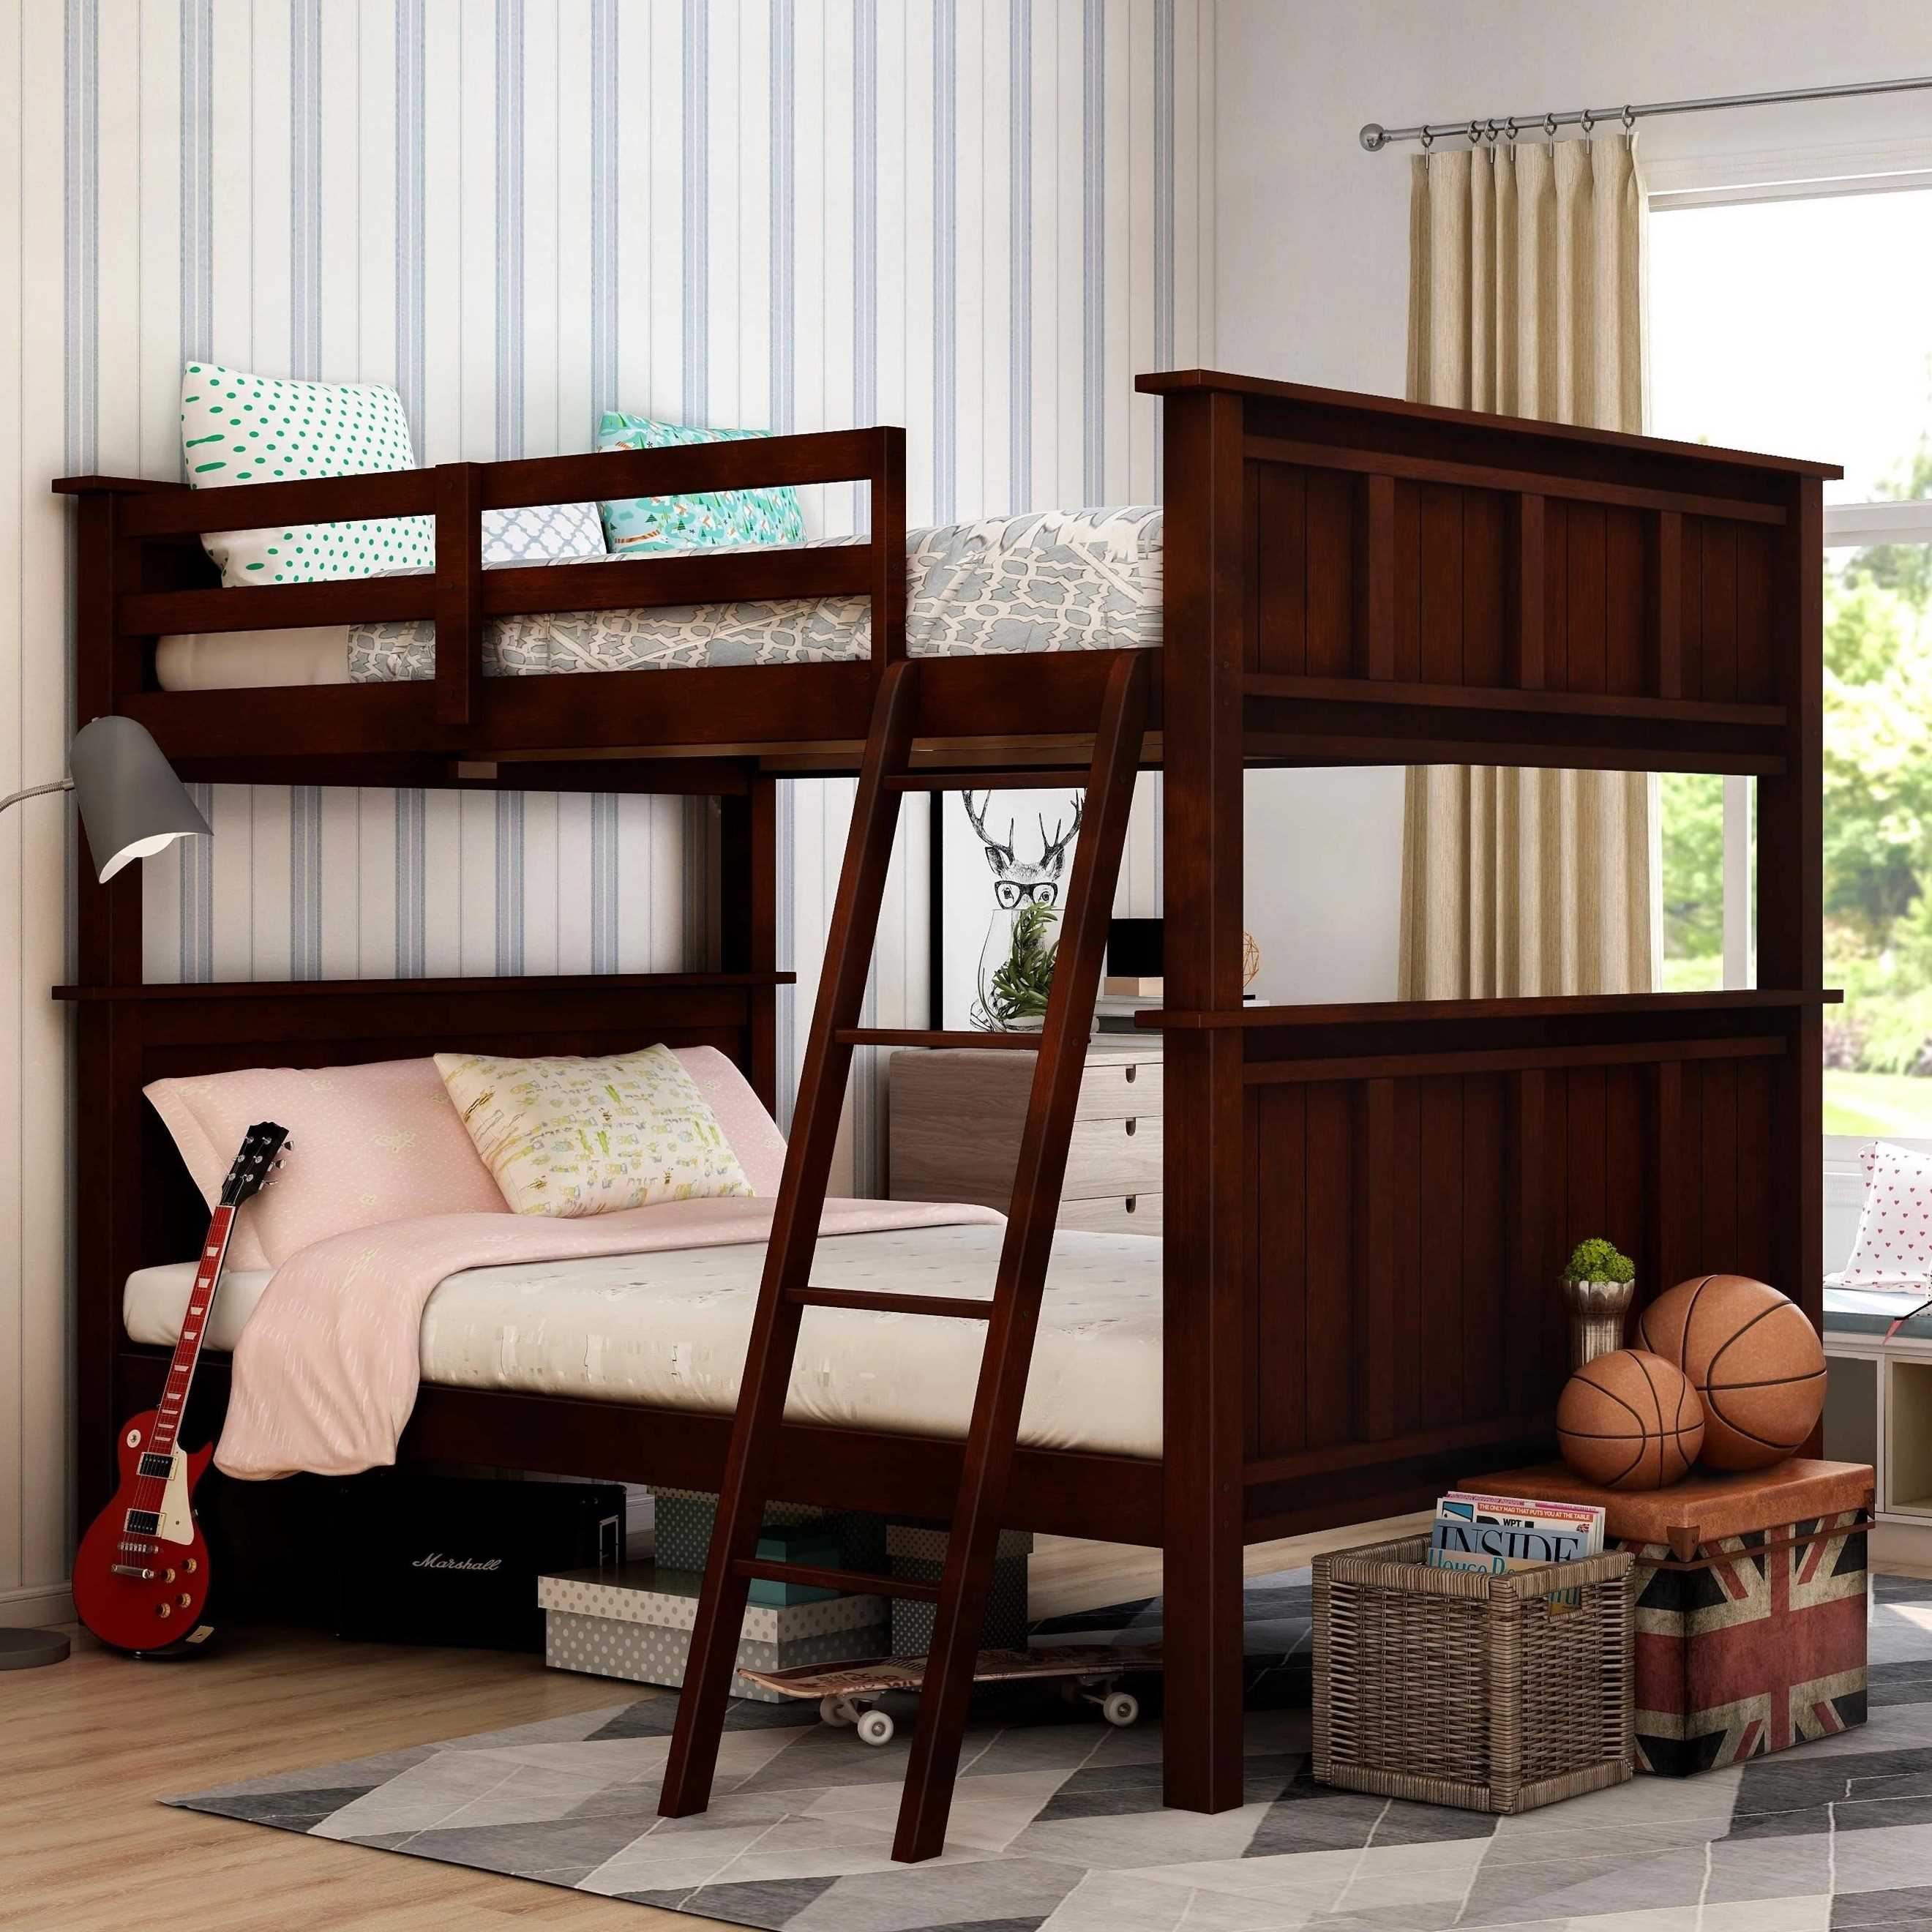 i need Wooden Bunk Bed